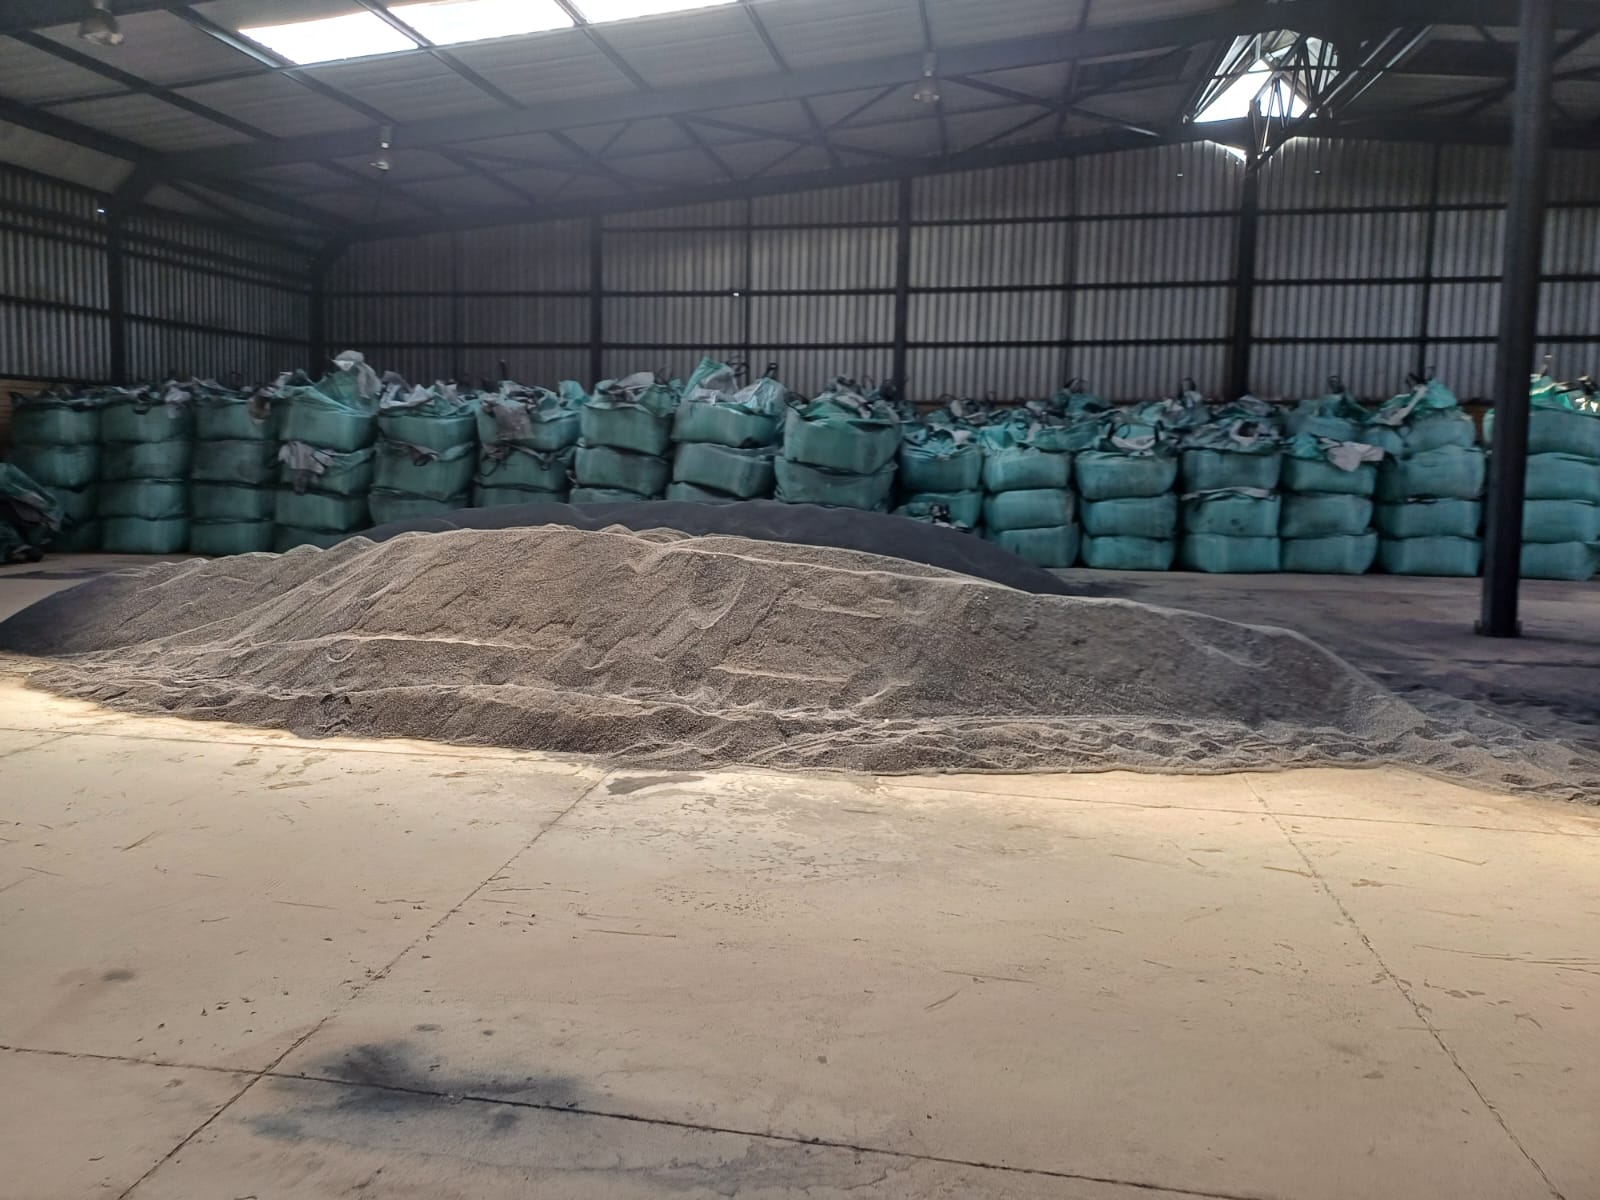 Stolen minerals worth millions from Richards Bay minerals recovered by SAPS at Johannesburg warehouse